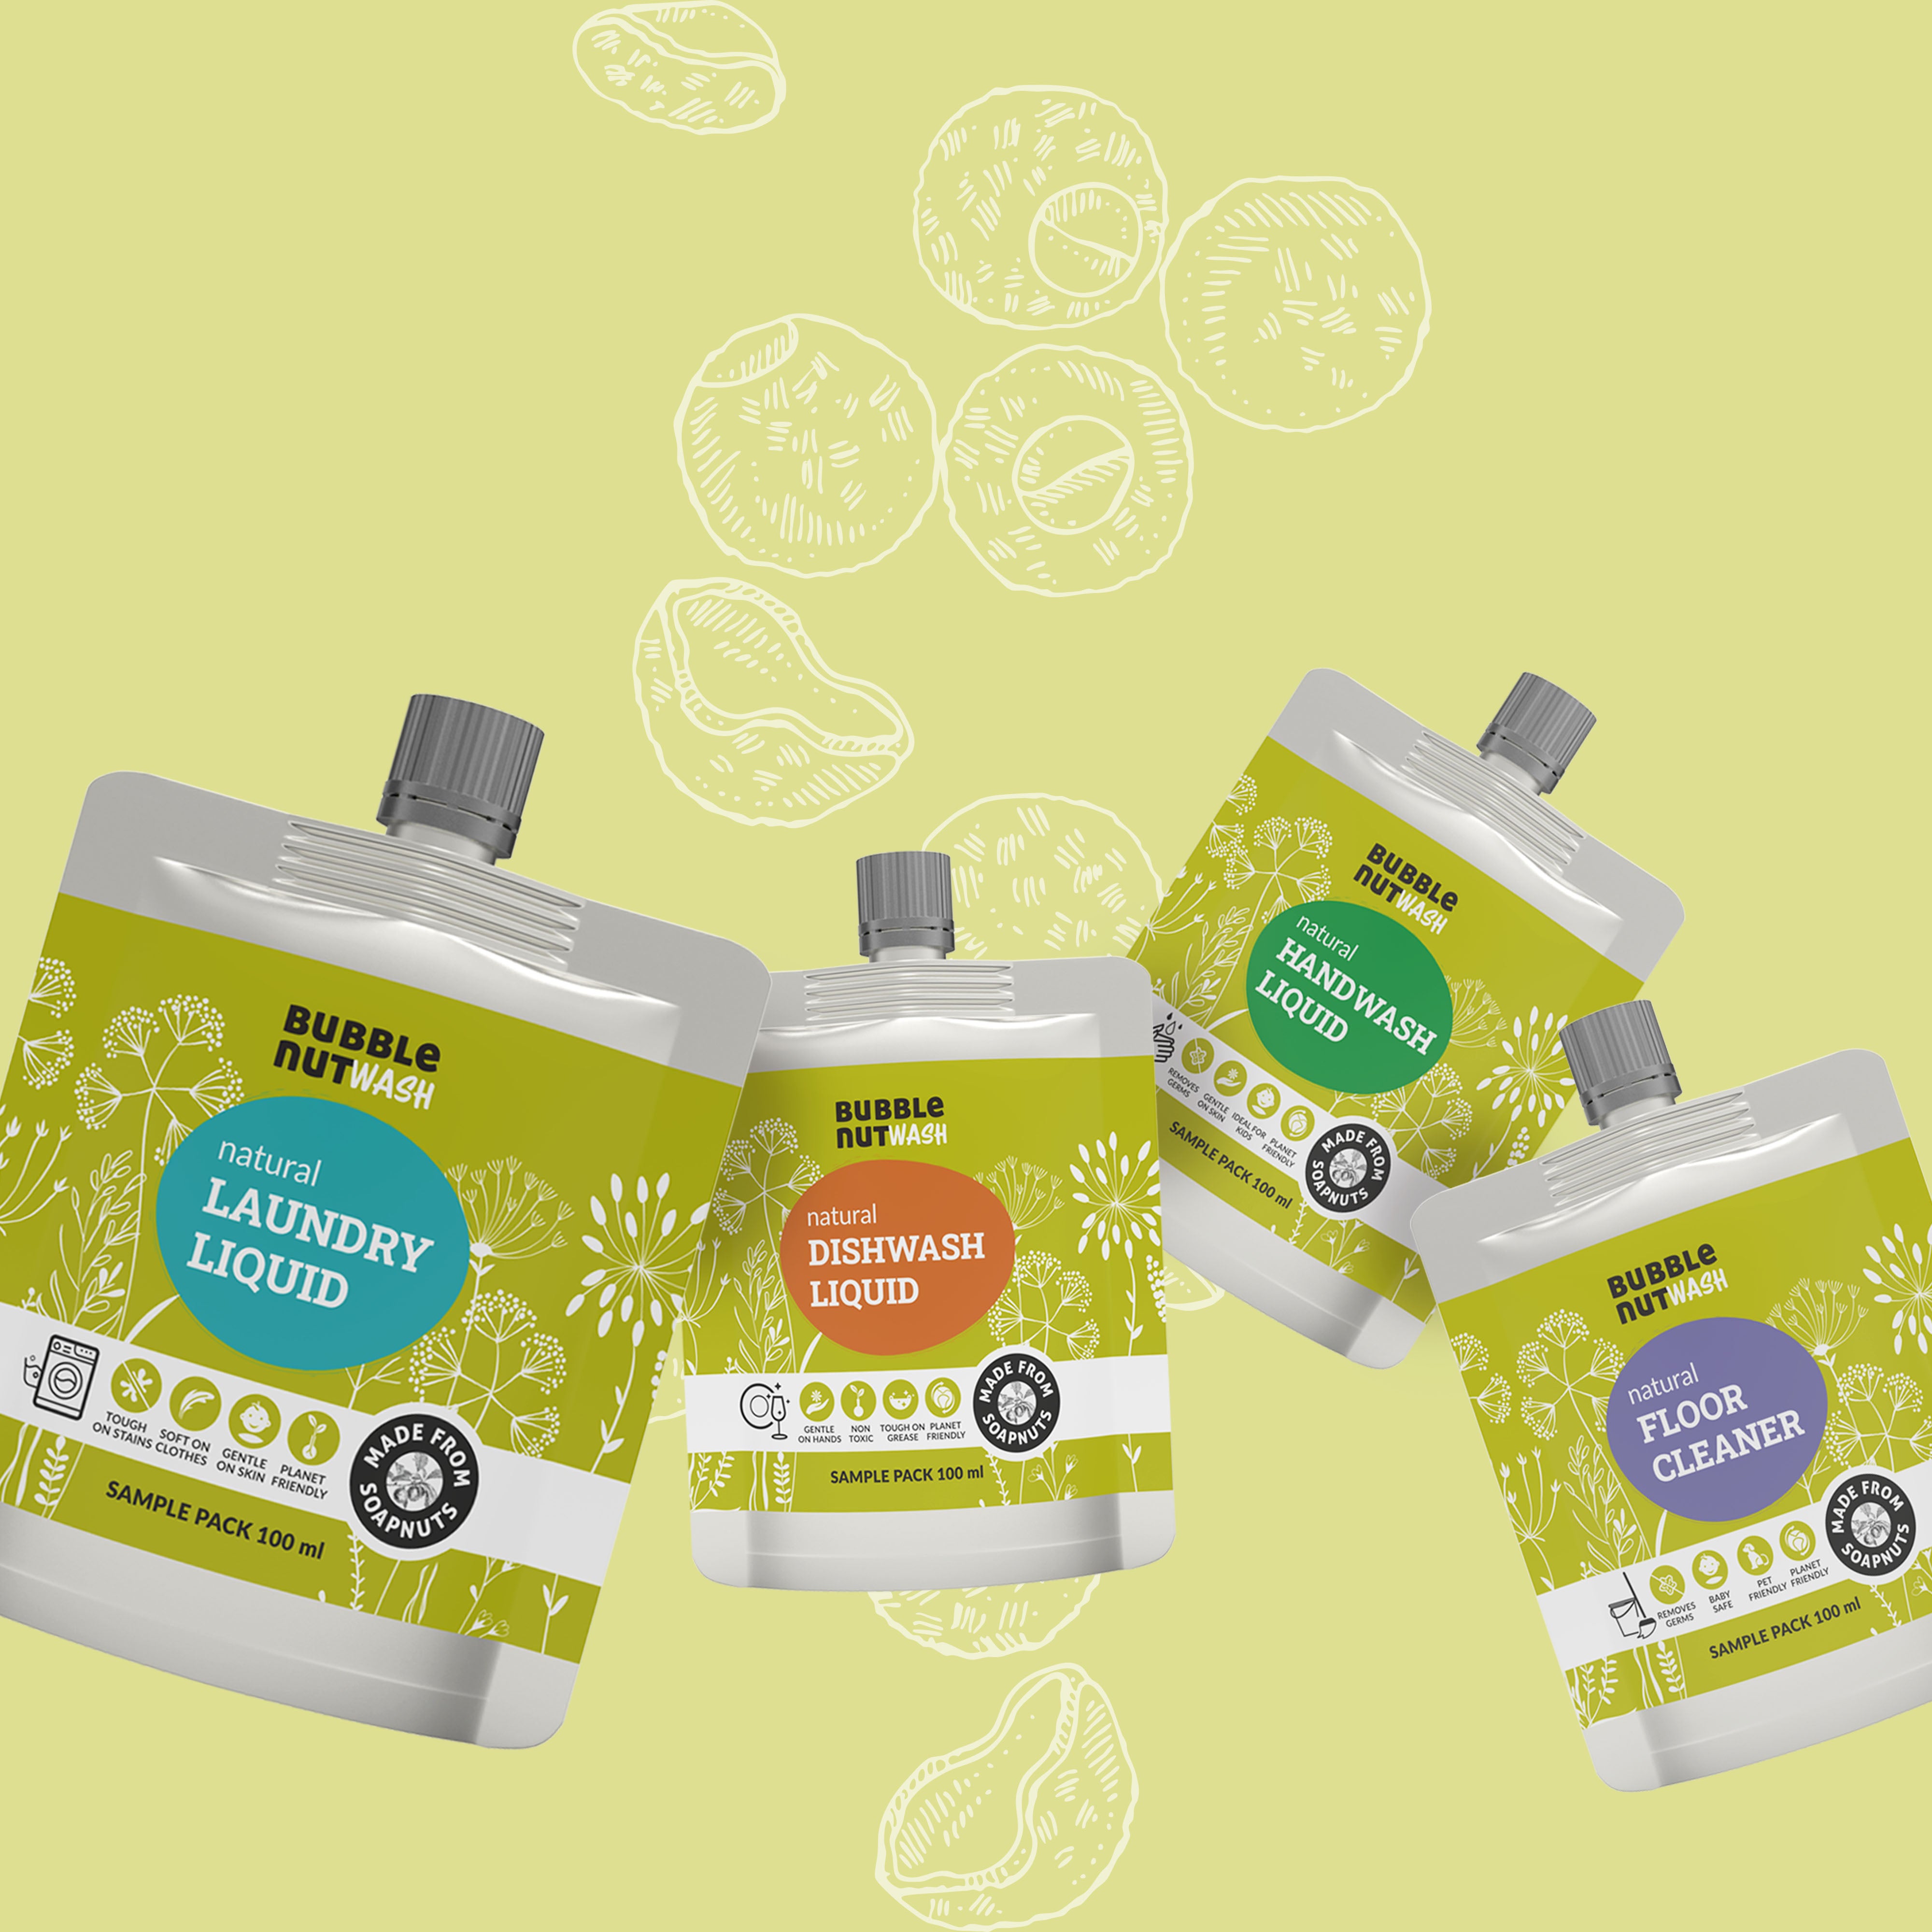 Free natural household cleaner samples